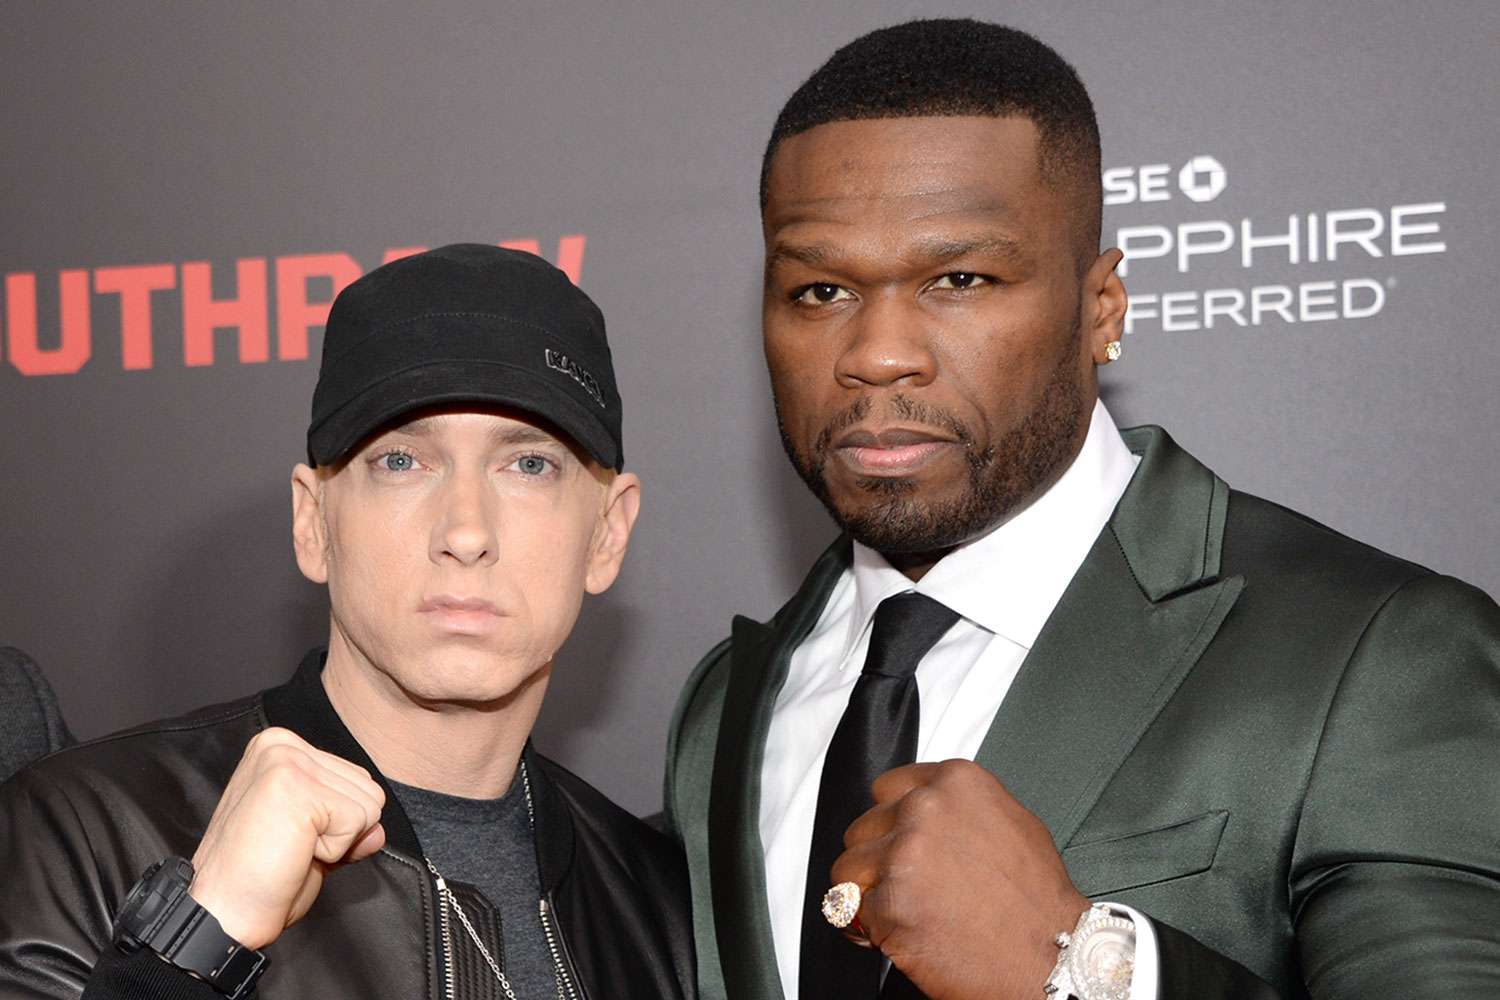 50 Cent says he’s working with Eminem on 8 Mile TV show